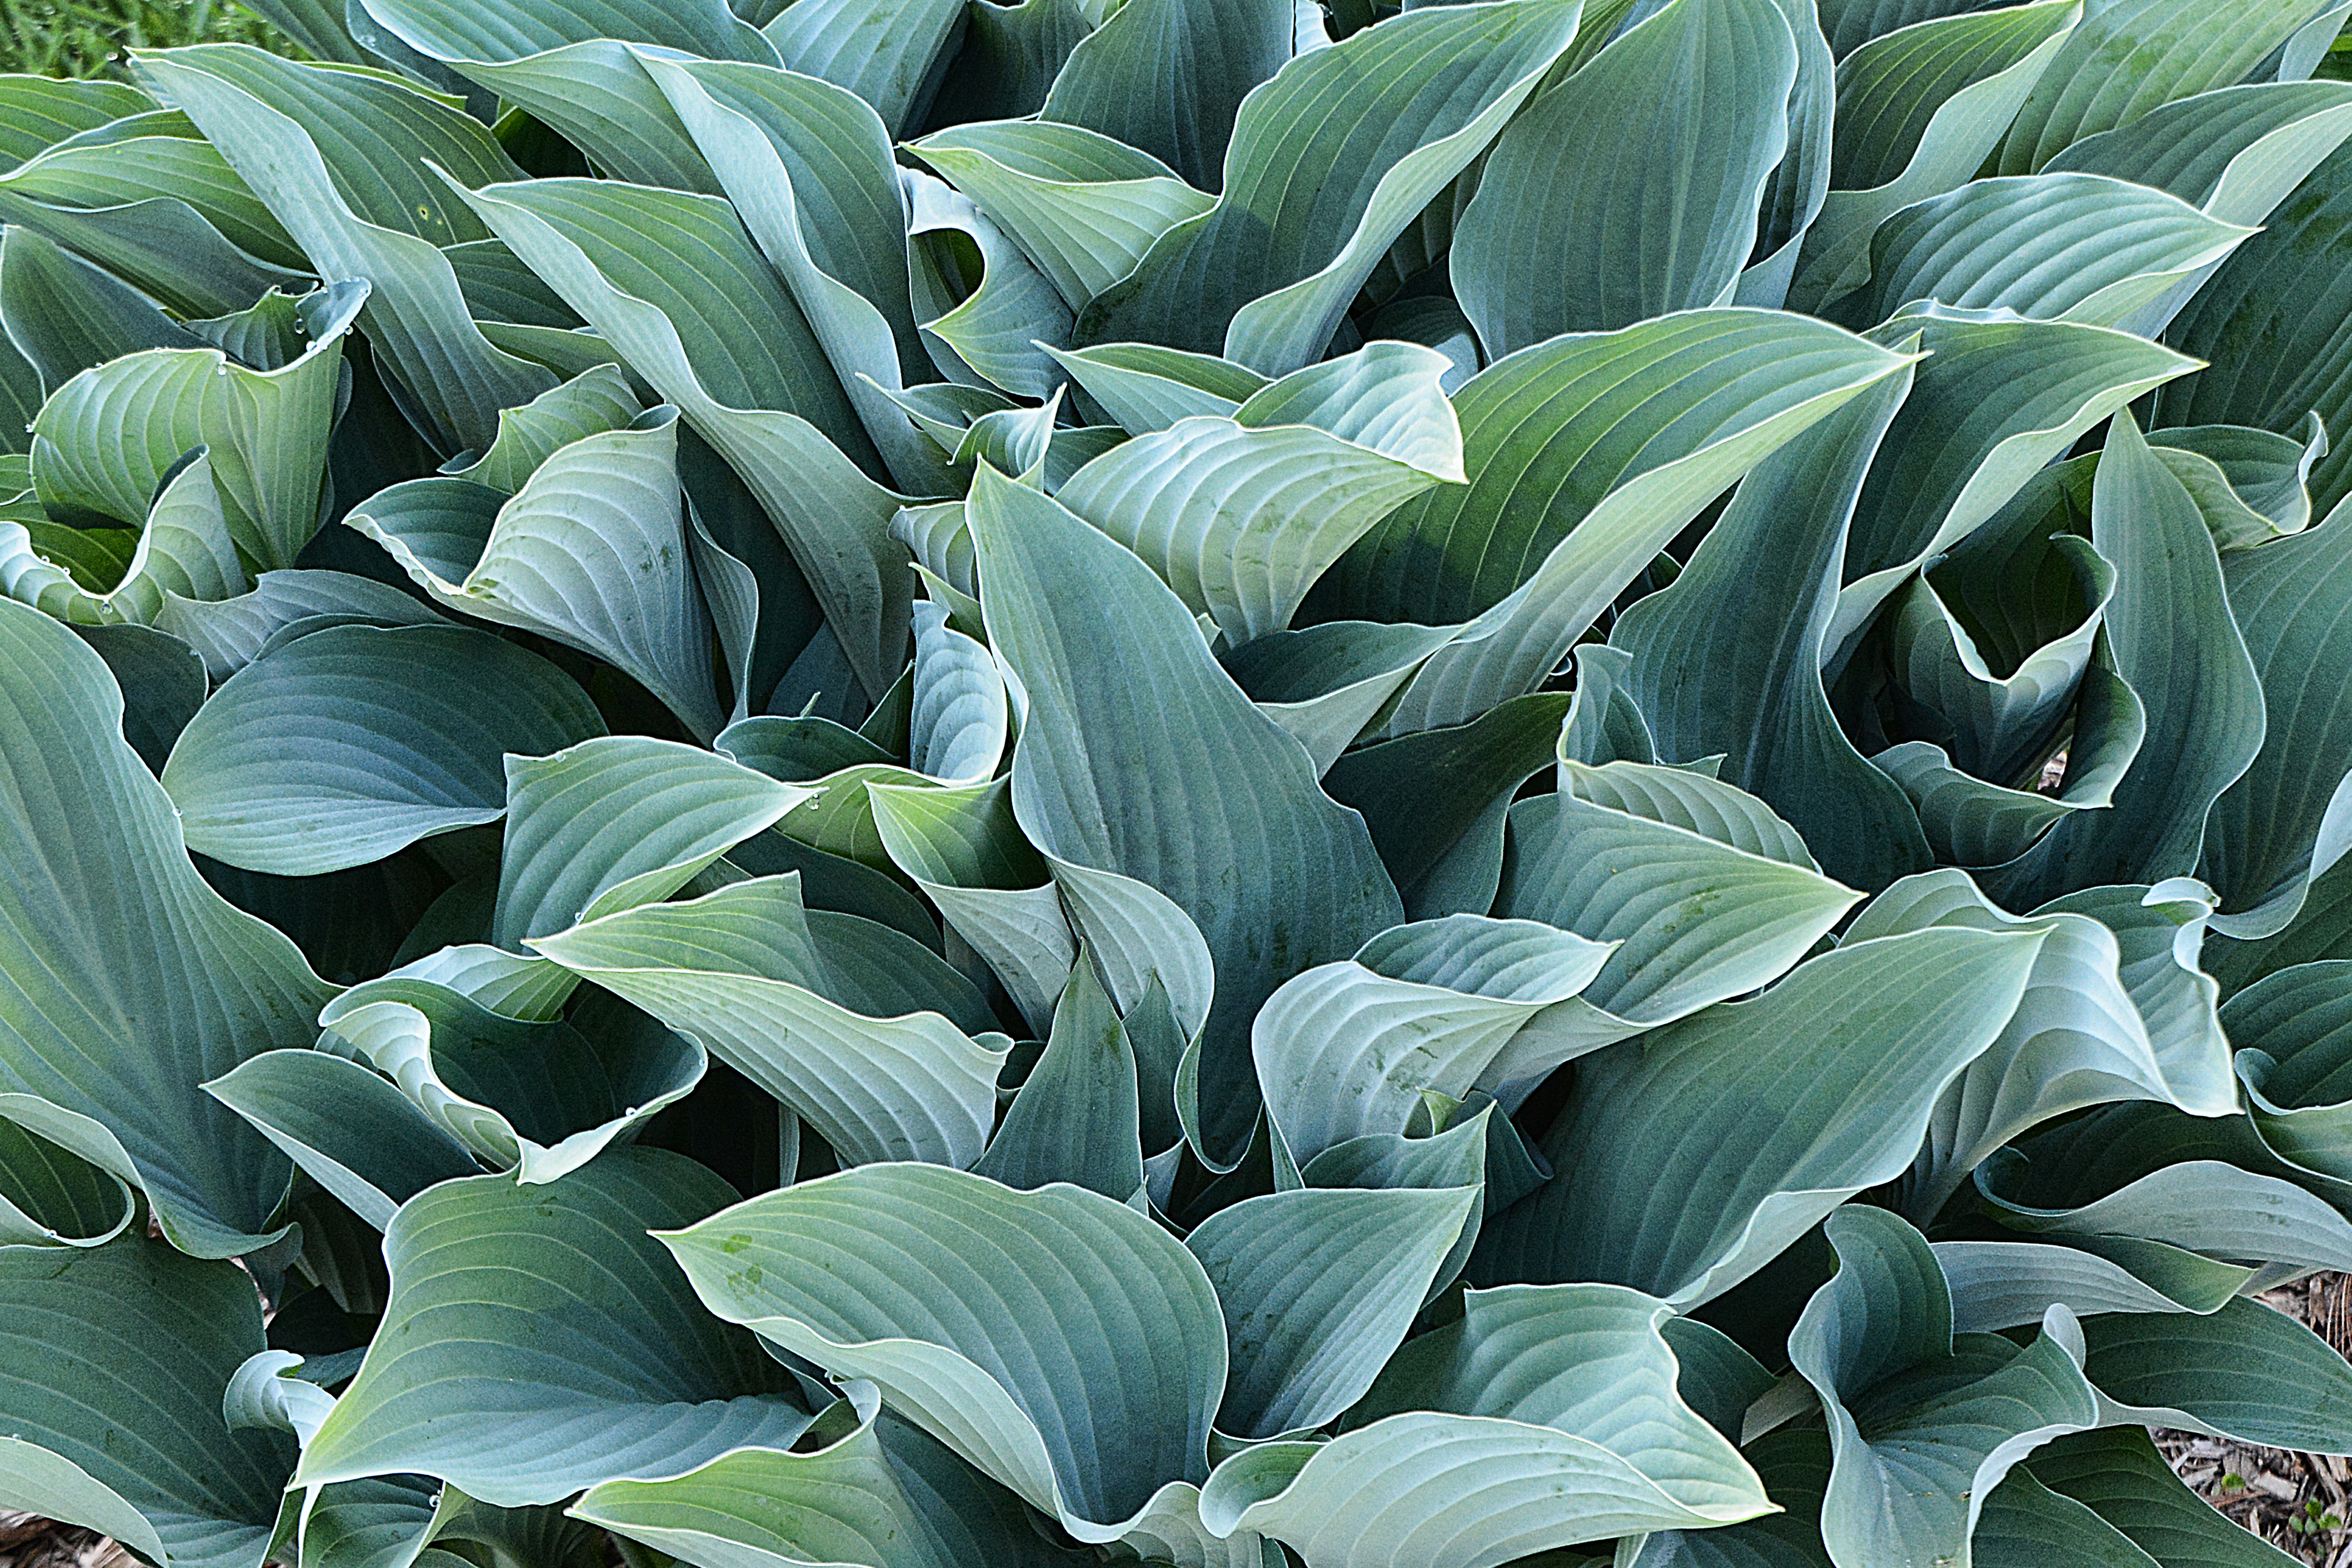 Hostas like damp conditions, but watch out for slugs. (Thinkstock/PA)